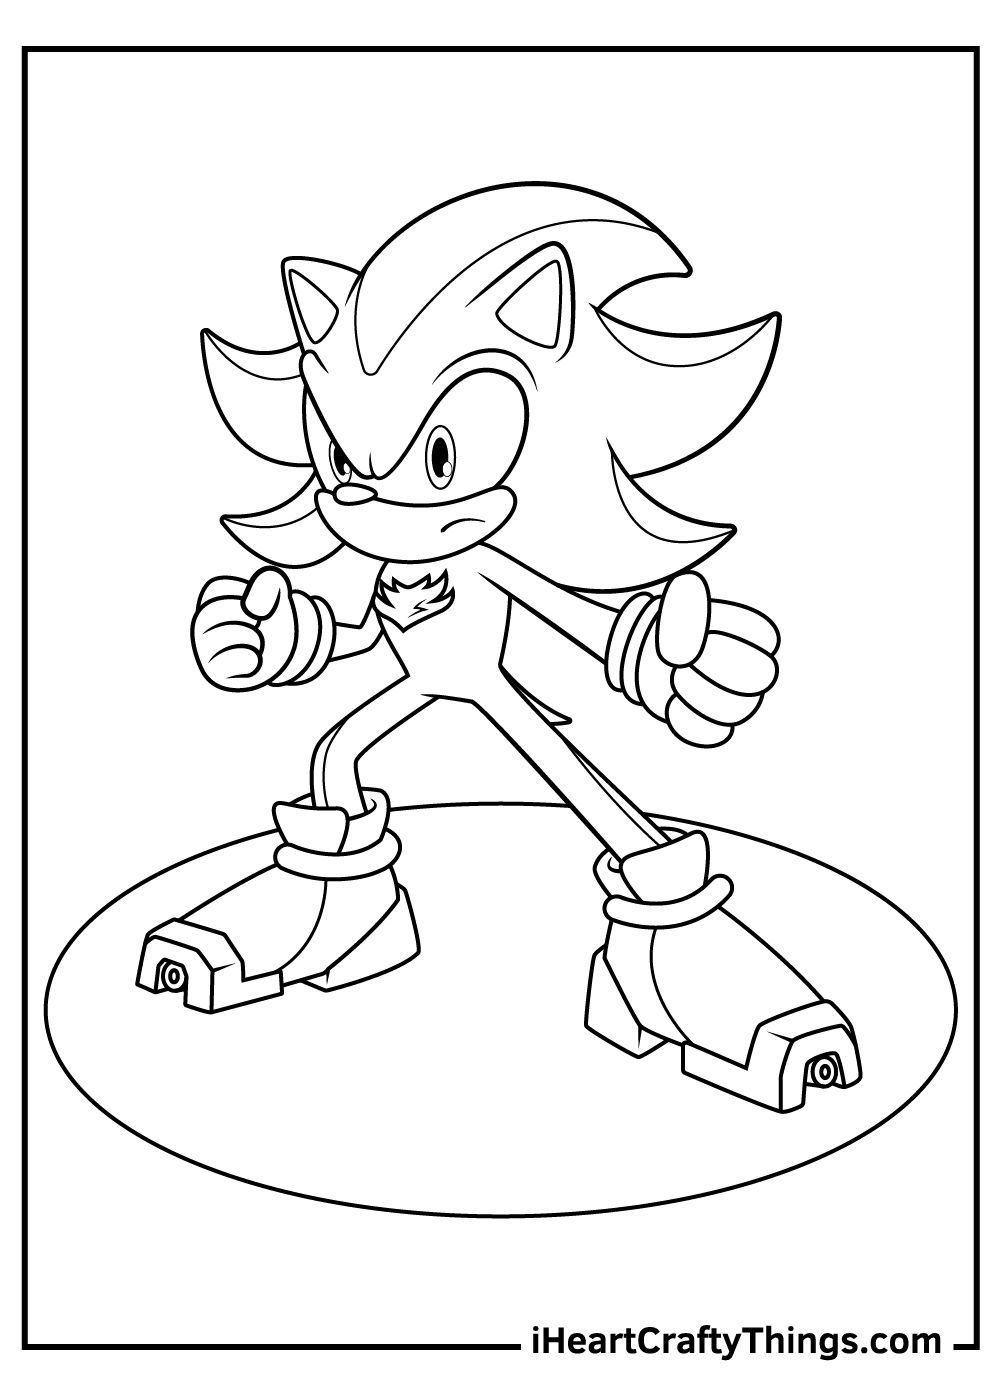 Shadow the hedgehog coloring pages hedgehog colors coloring pages shadow the hedgehog